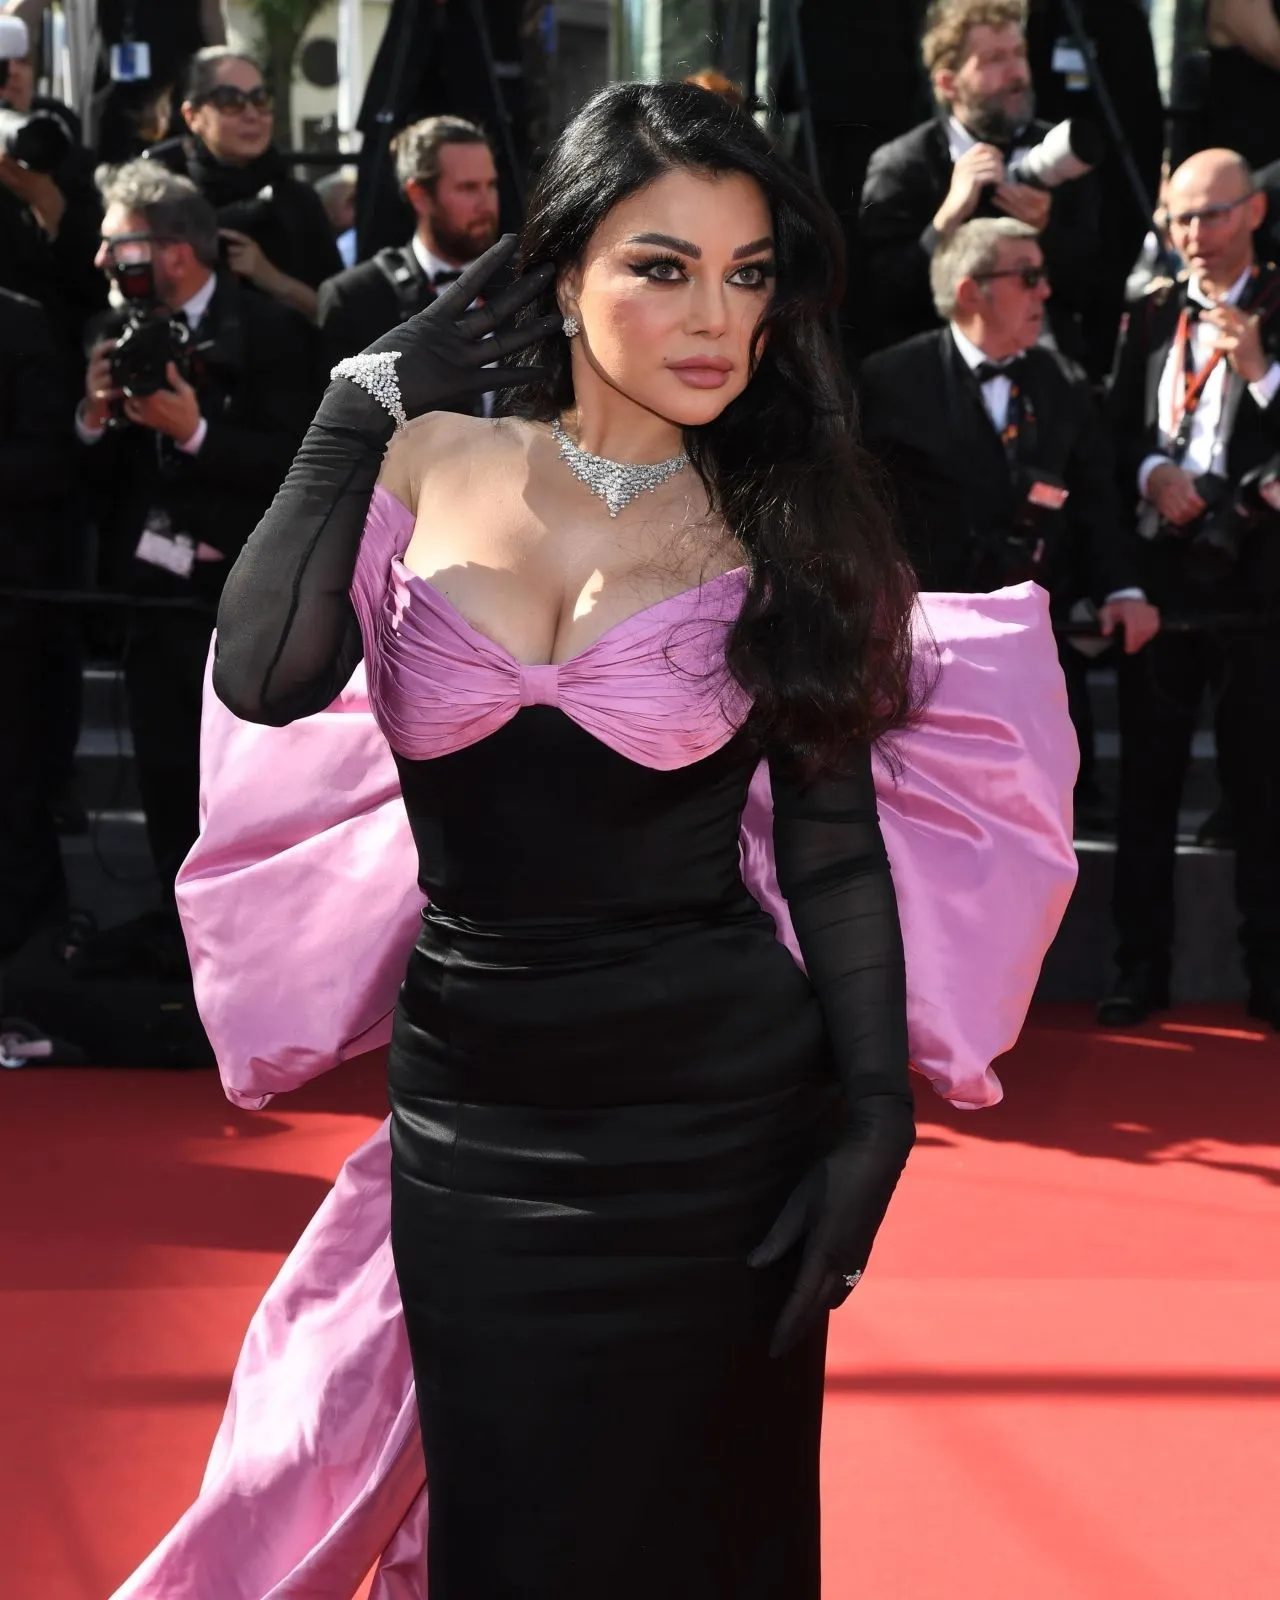 HAIFA WEHBE AT THE COUNT OF MONTE CRISTO PREMIERE AT CANNES FILM FESTIVAL1